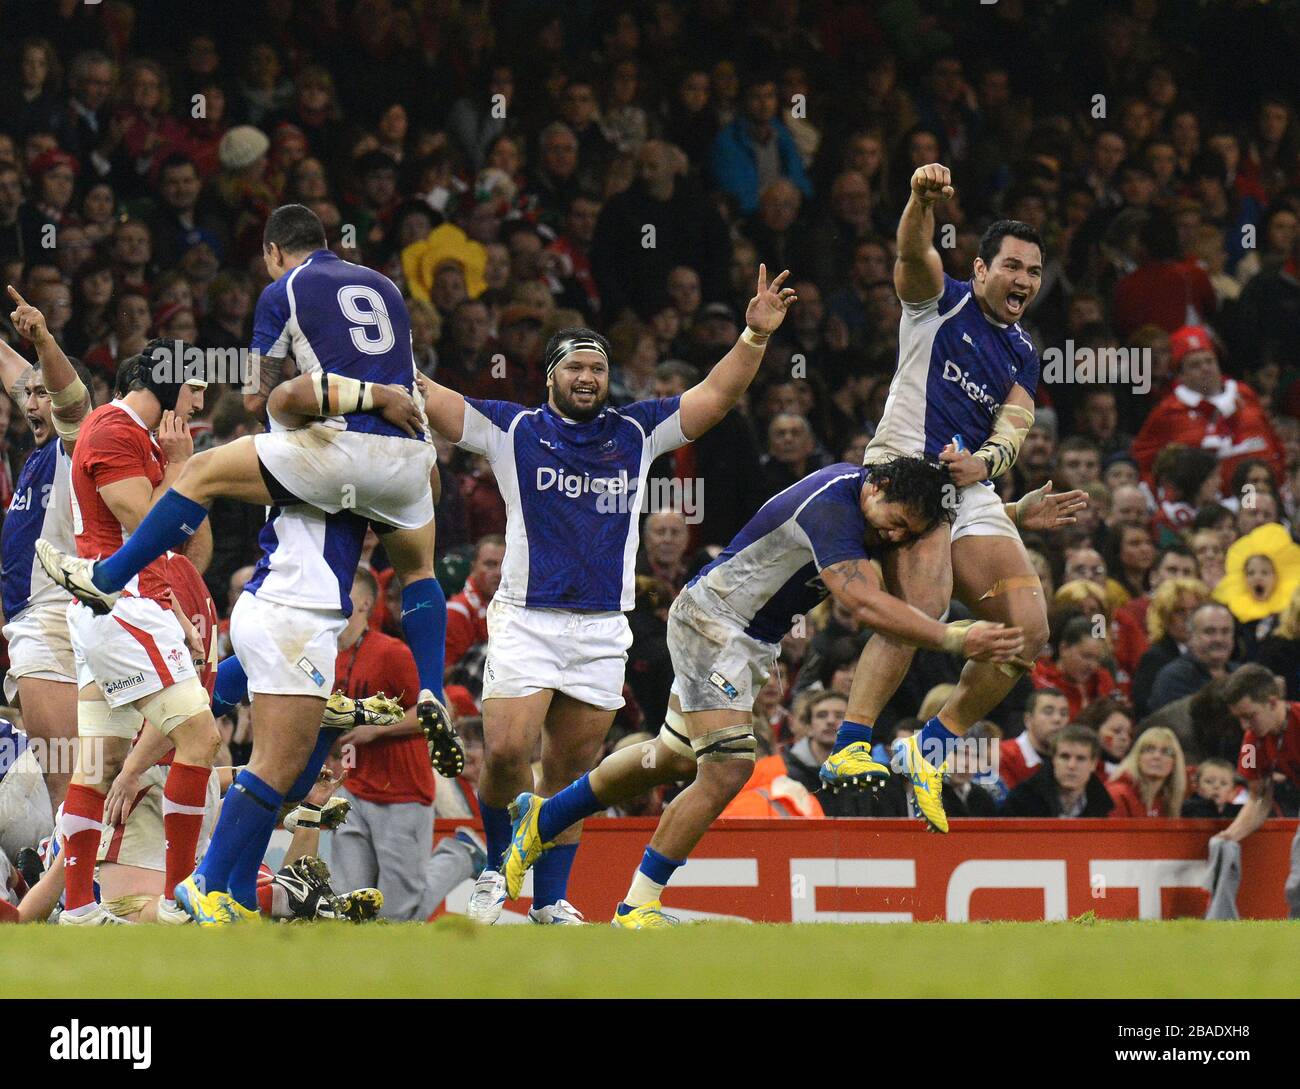 Samoa's players celebrate their win over Wales at the end of the match Stock Photo